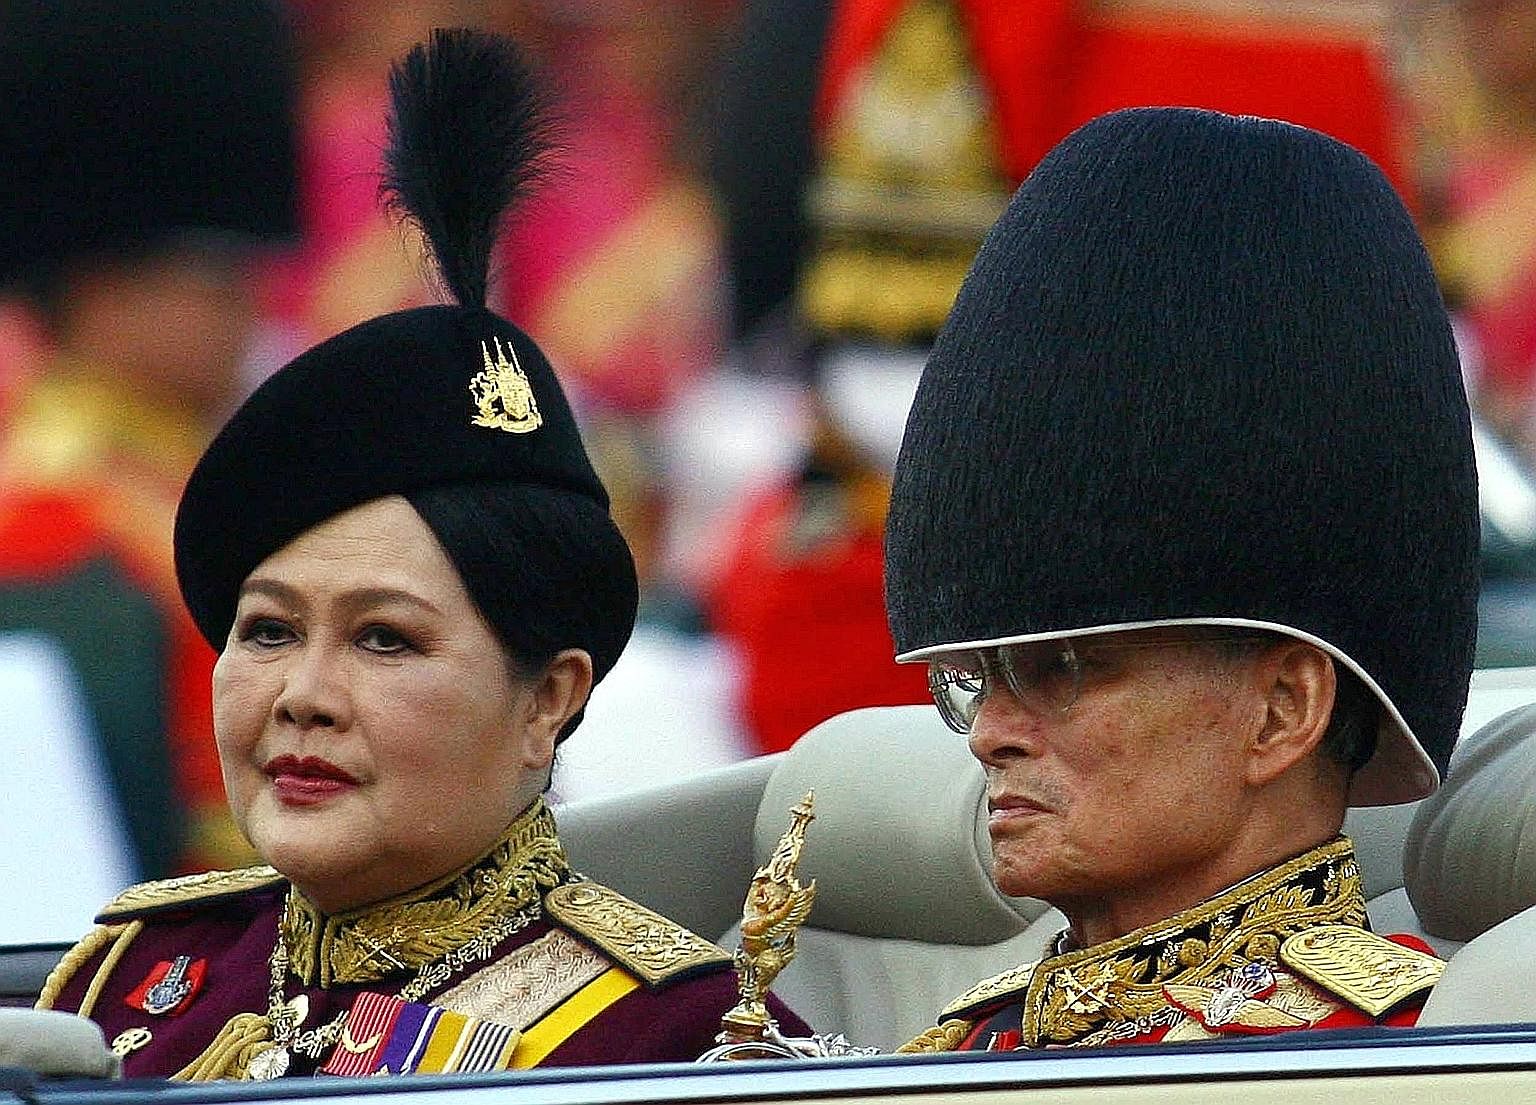 King Bhumibol Adulyadej and Queen Sirikit at celebrations in Bangkok to mark his 79th birthday in 2006. For the majority of Thais who have known only one monarch amid decades of political turbulence, the King's death represents the loss of a moral au